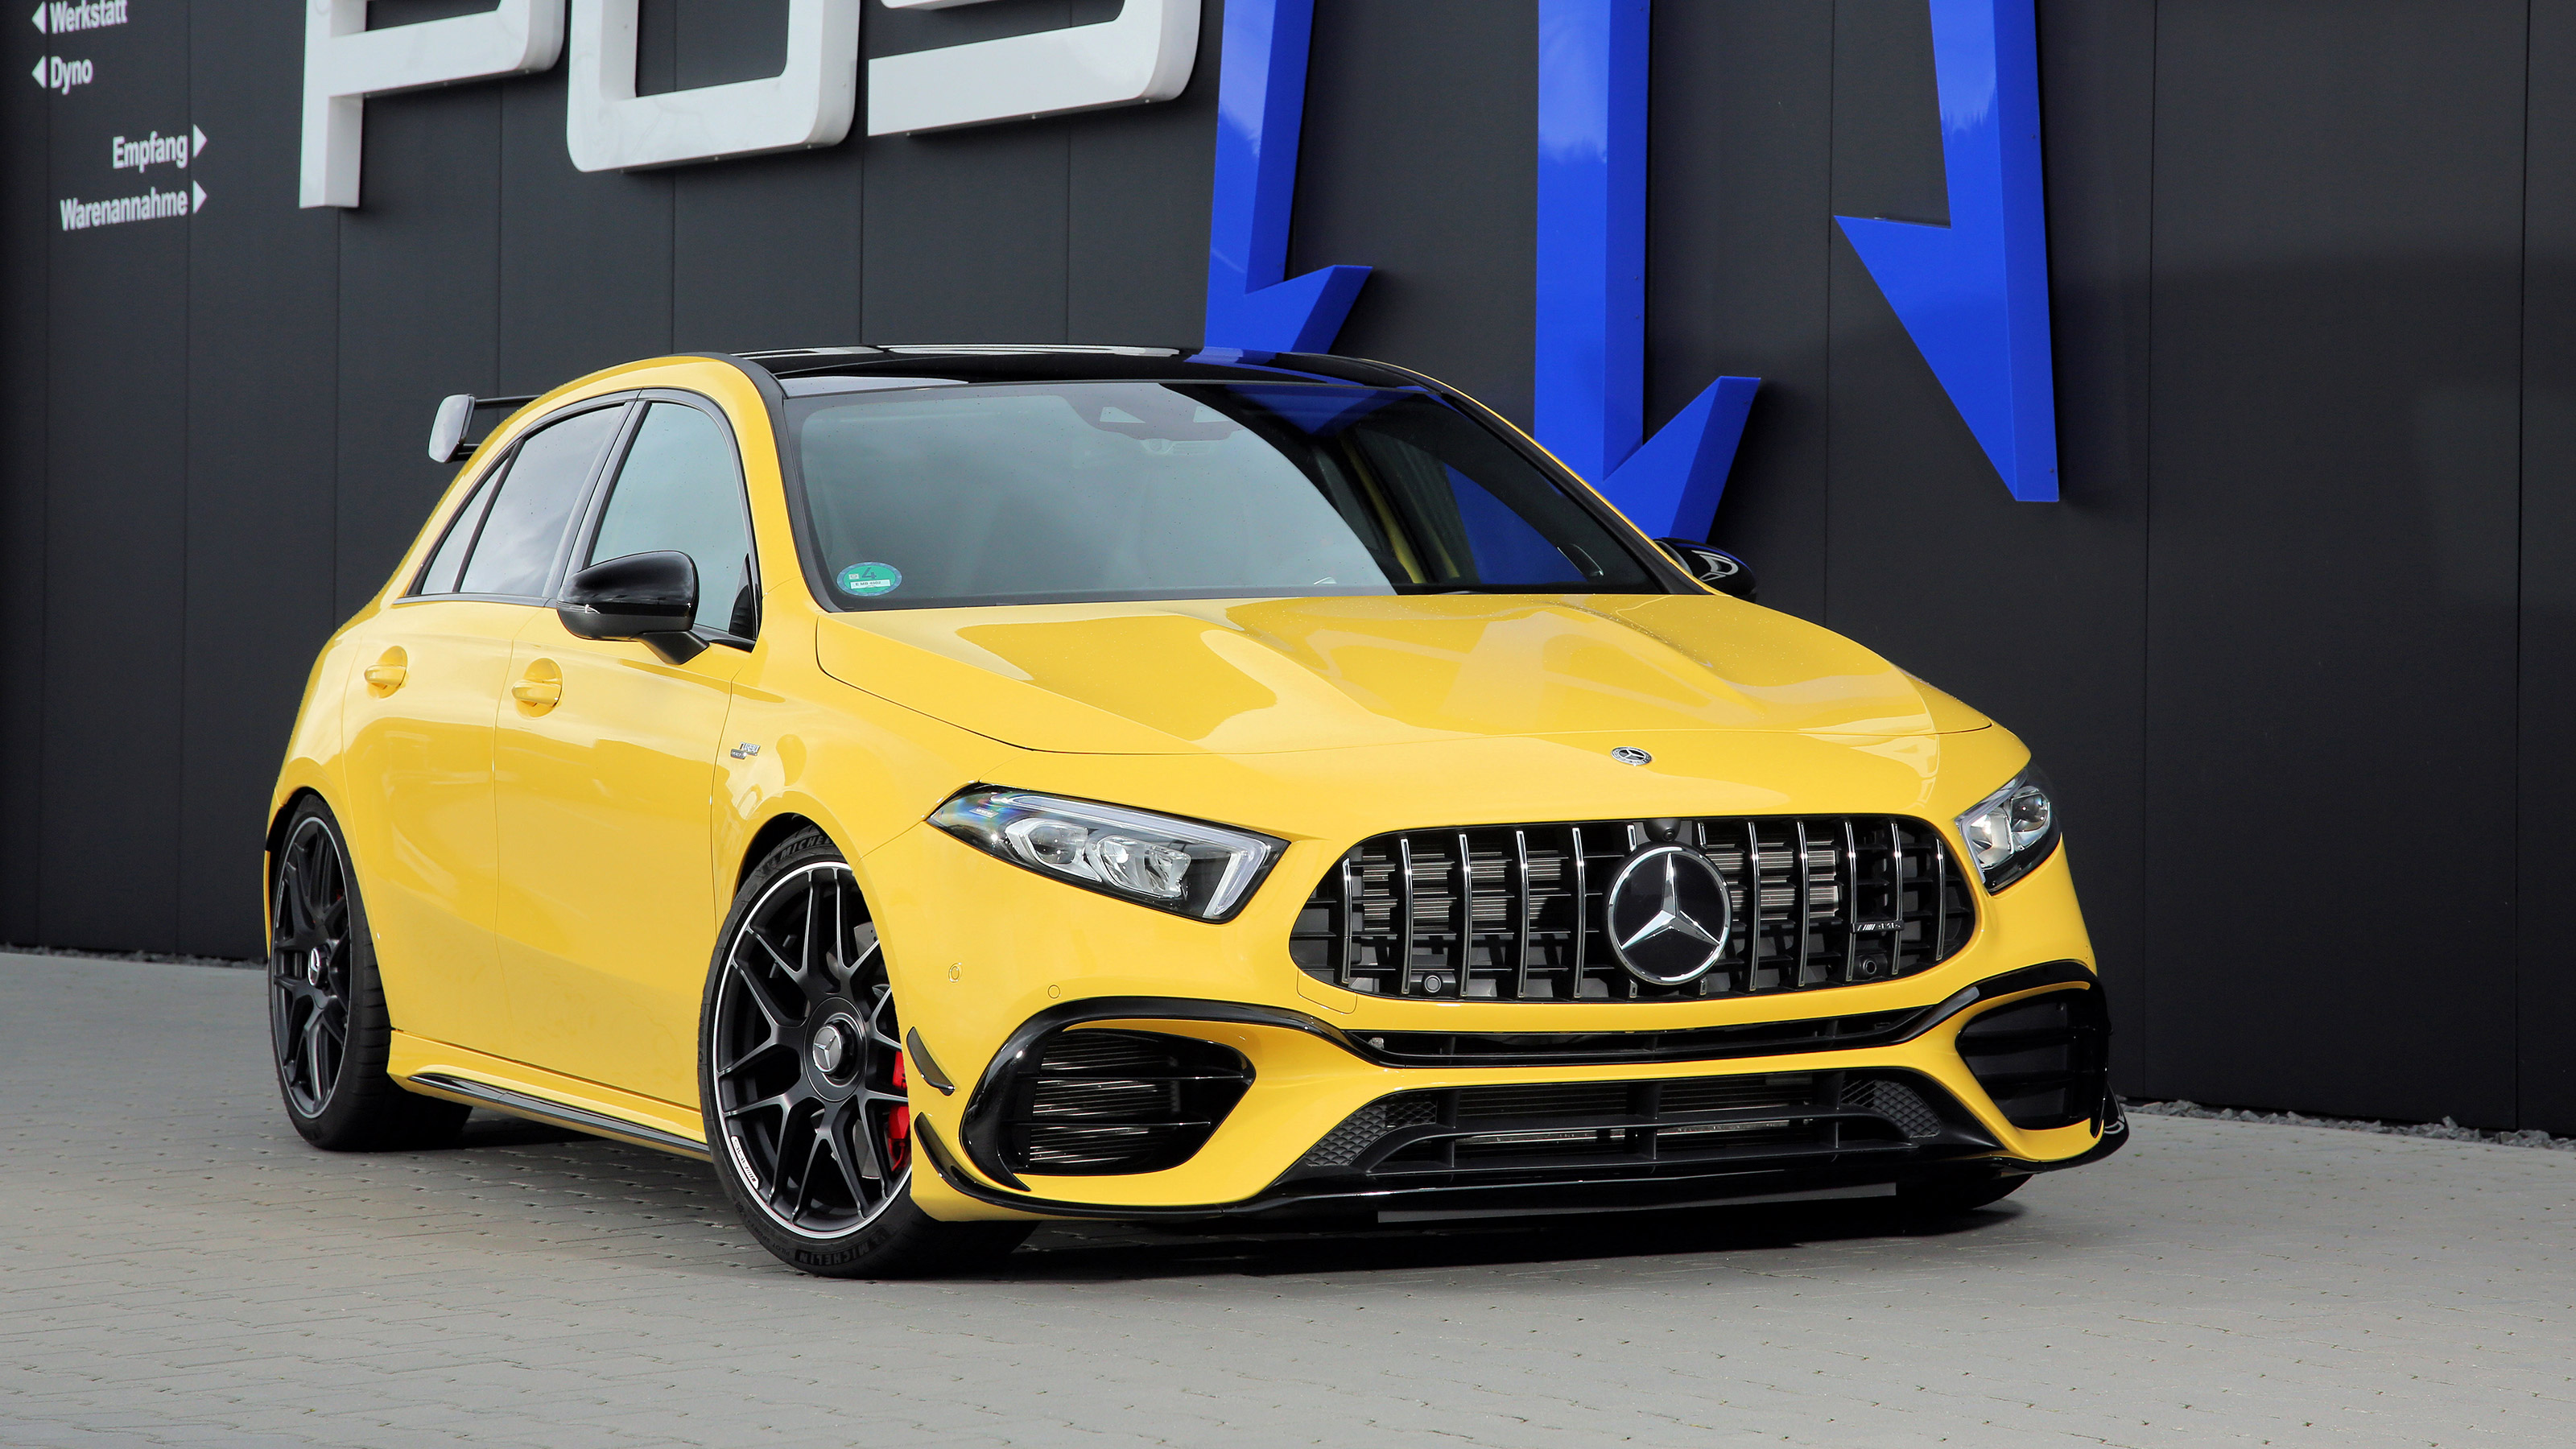 Mercedes A45 Amg Specs This Mercedes-AMG A45 S has a 201mph top speed | evo